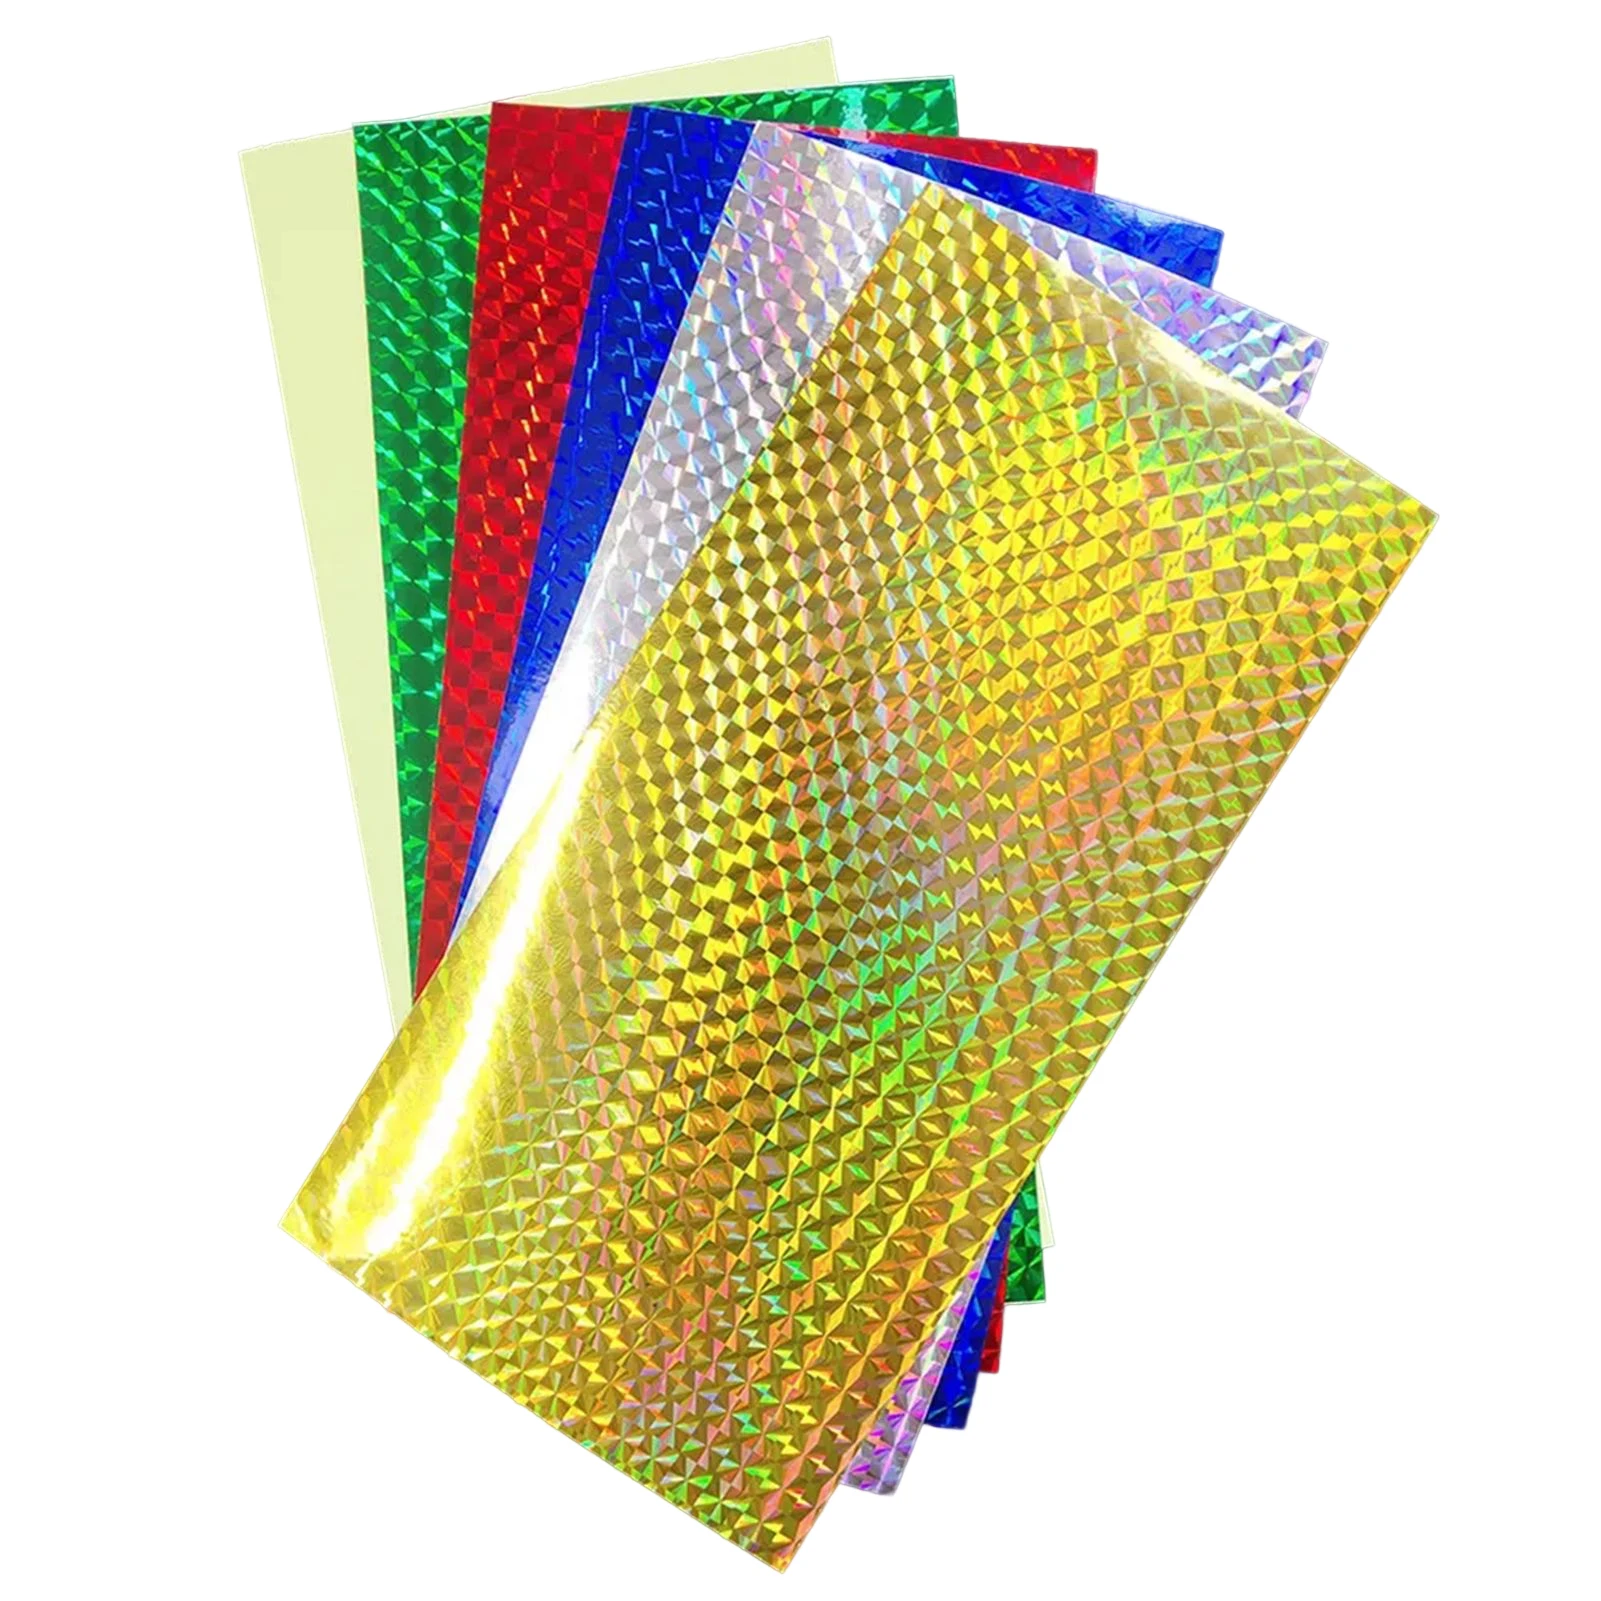 12 Sheets Fishing Lure Prism Tape Durable Bright Color Holographic Adhesive Flash Tape for Fishing Lures B2Cshop